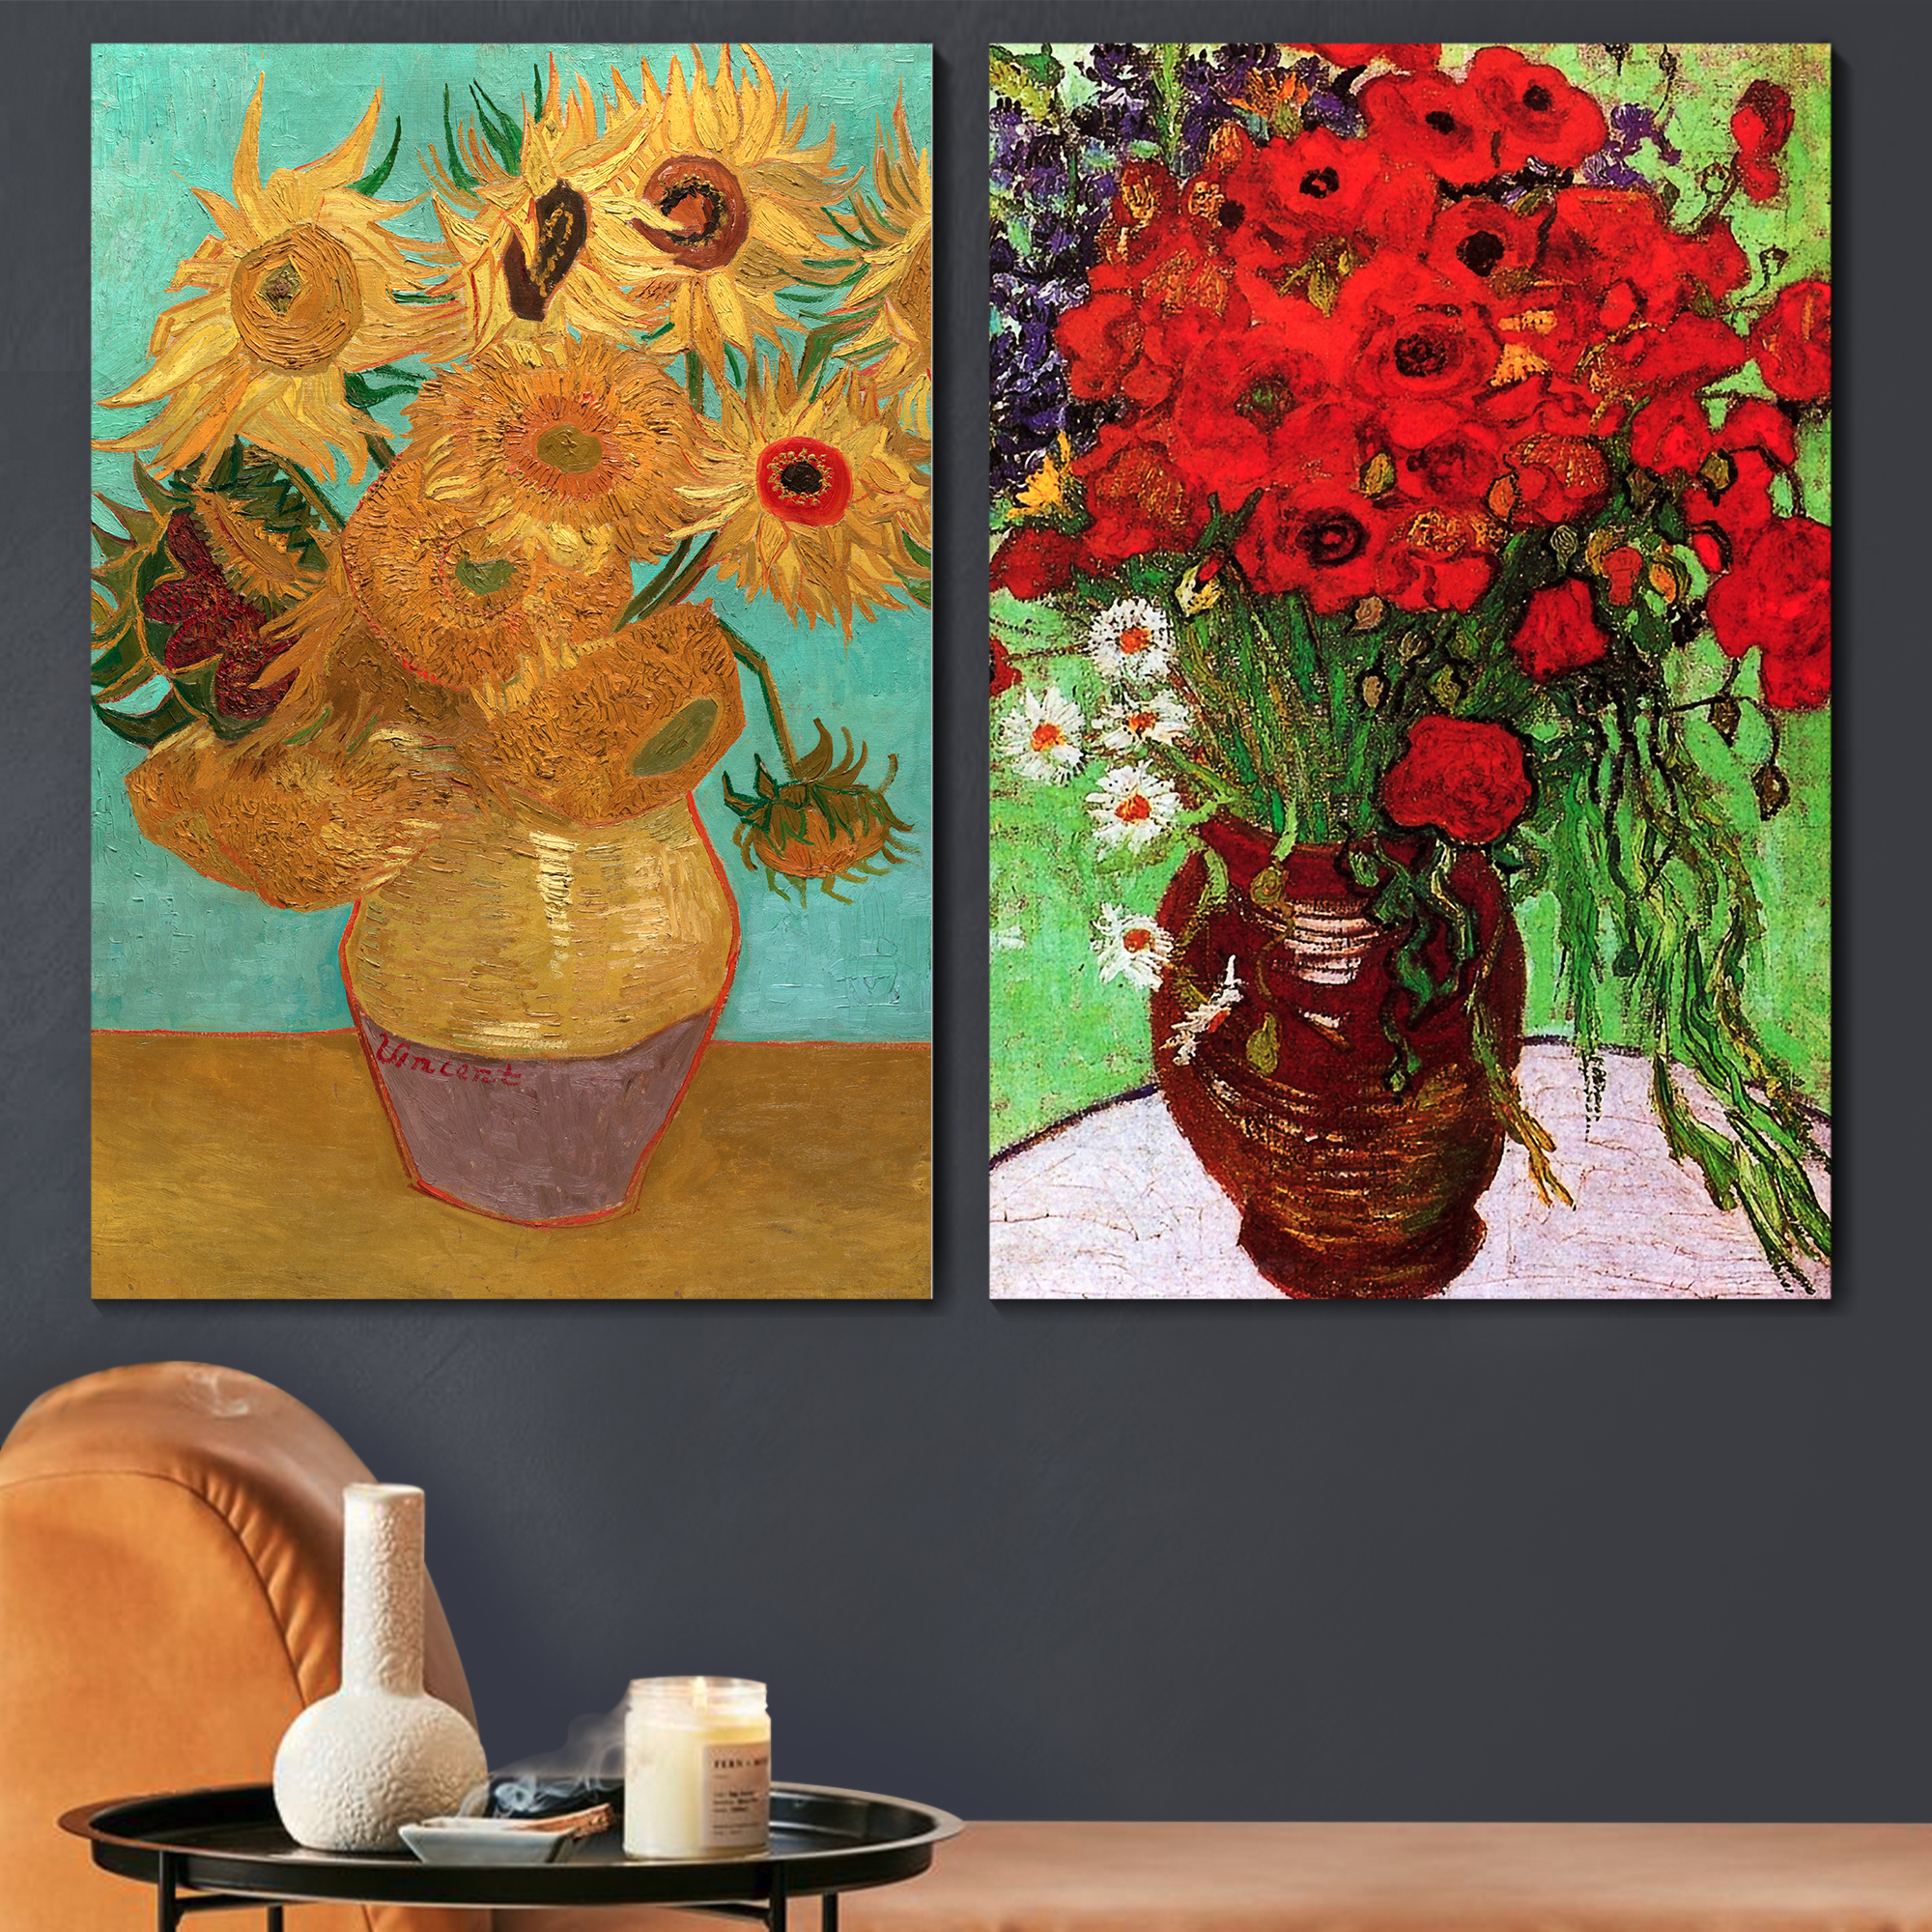 Famous Oil Painting Reproduction/ Replica Set of 2 - Still Life Vase with Twelve Sunflowers & Red Poppies and Daisies by Van Gogh Canvas Prints Wall Art/Ready to Hang Wrapped Canvas - 16